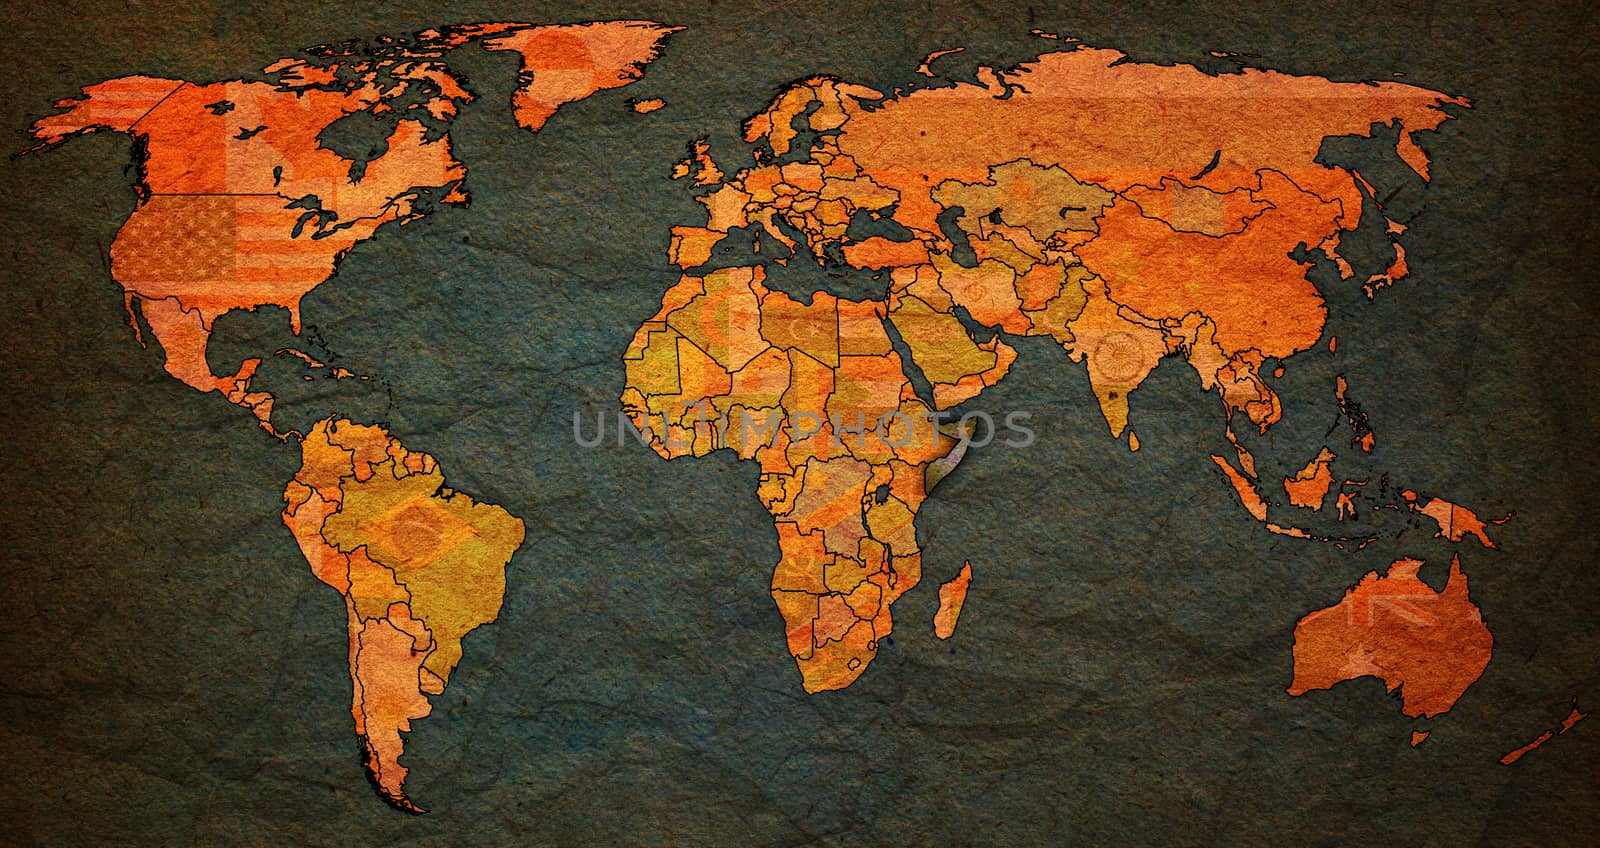 somalia territory on world map by michal812